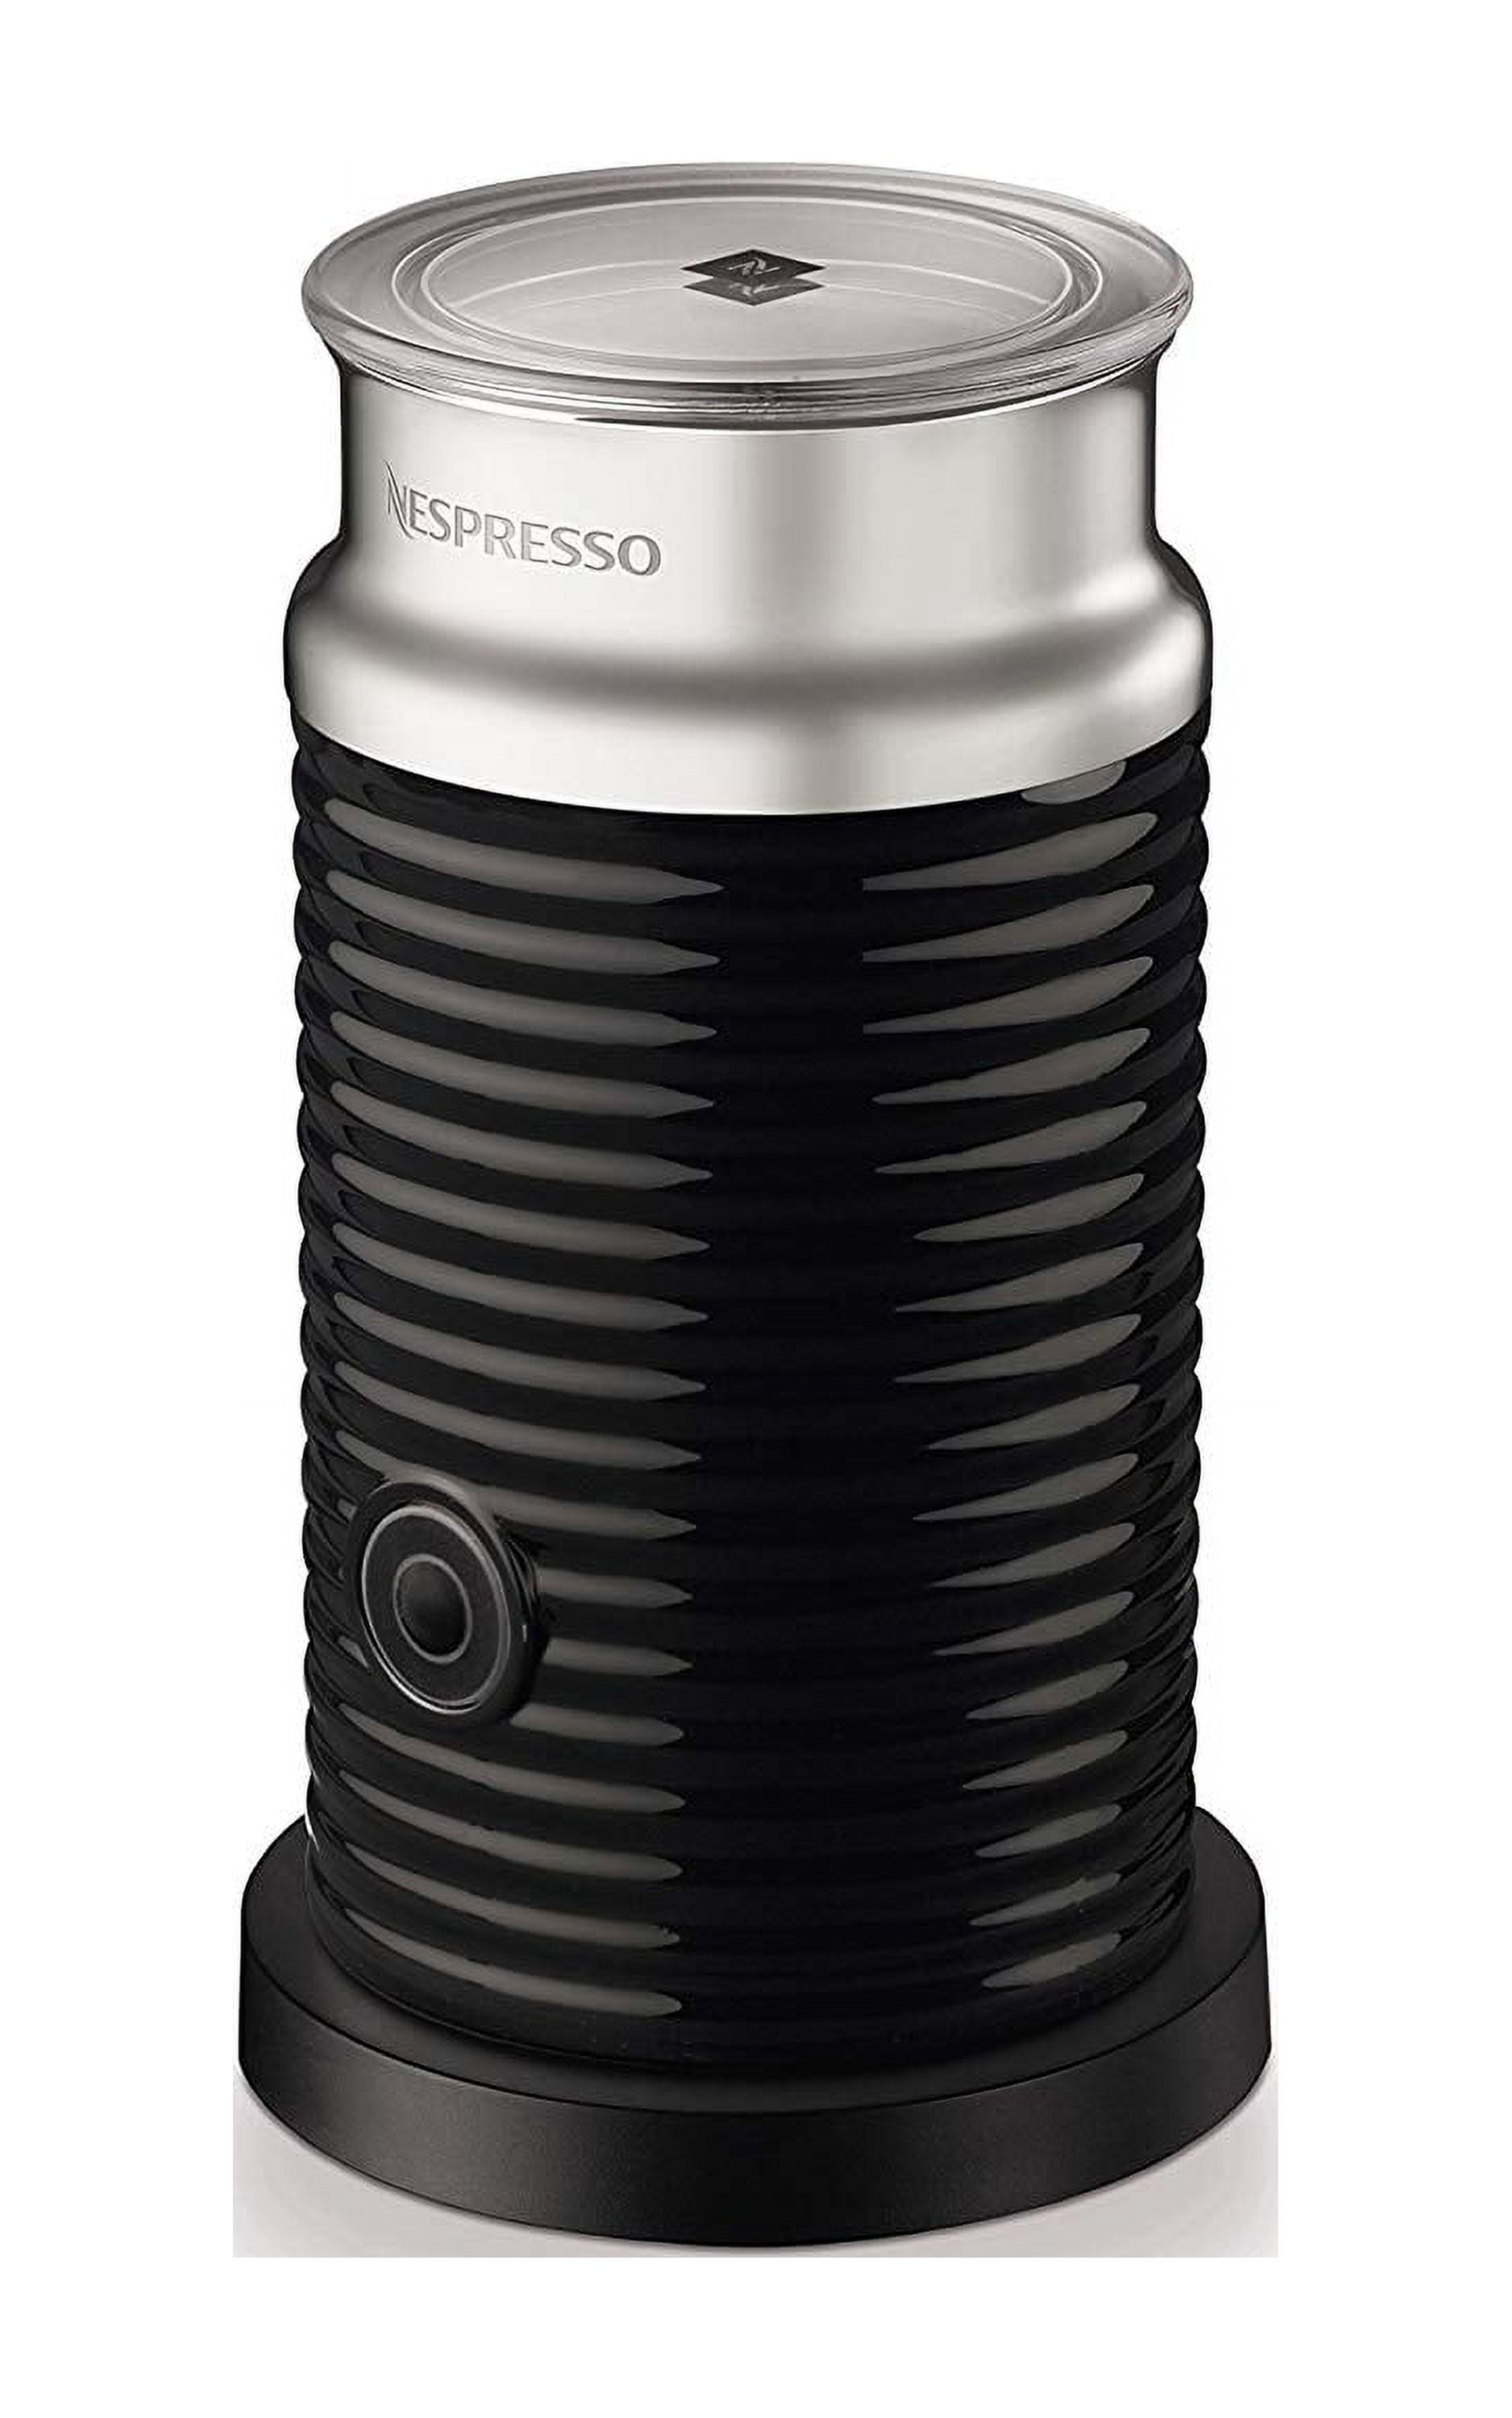 NESPRESSO AEROCCINO 3 Milk Heater & Frother Choose Black, Red Or